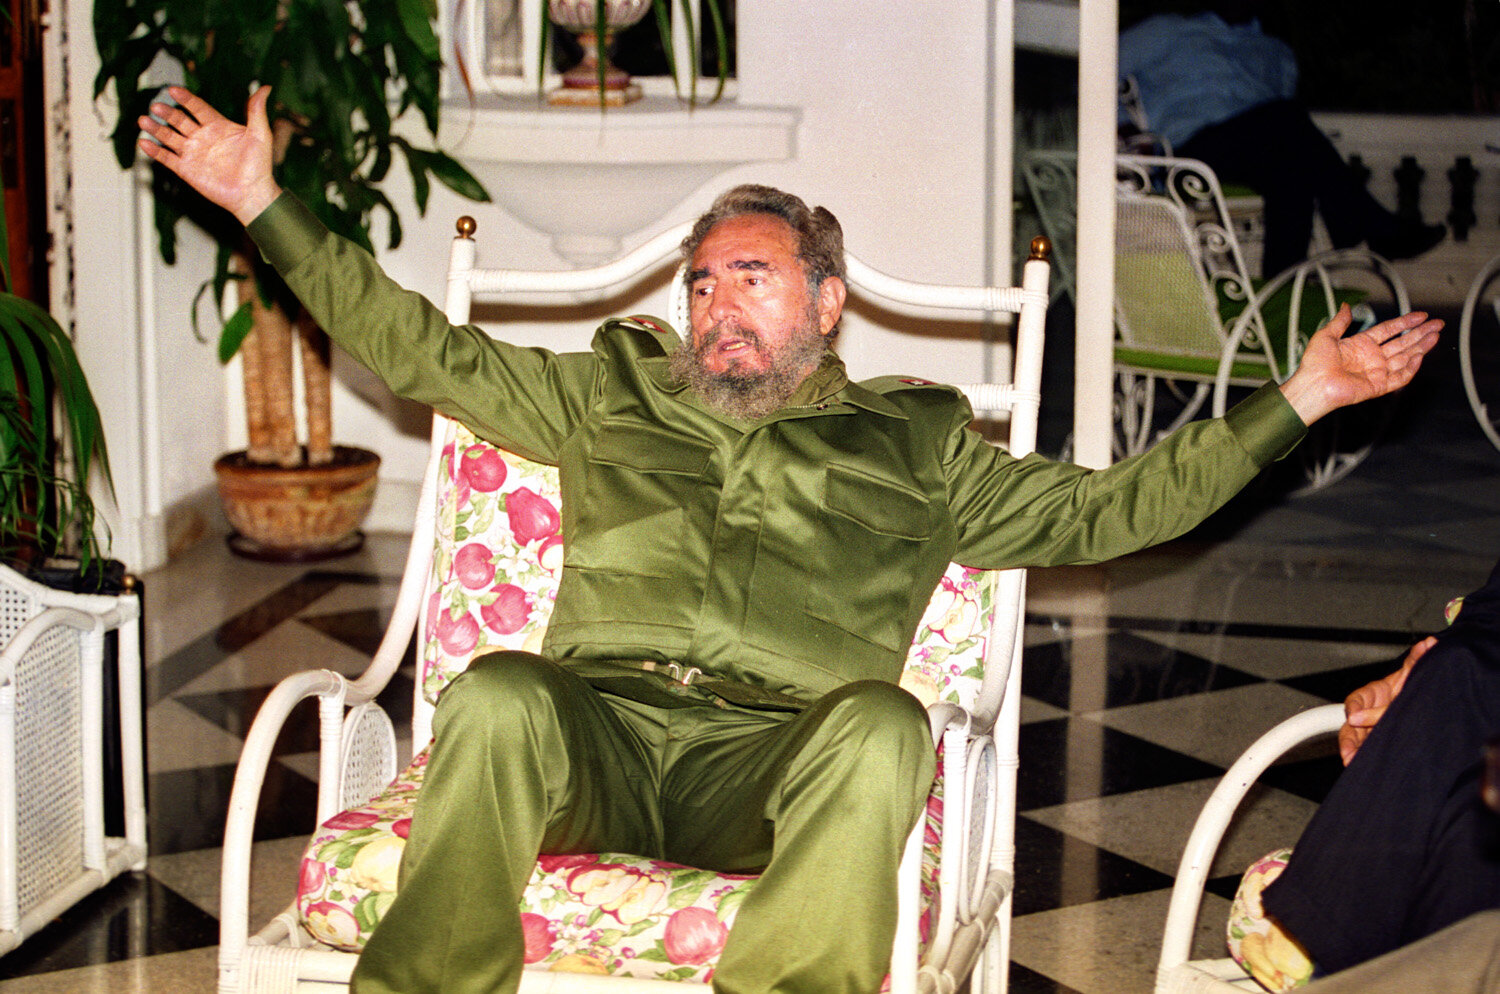  Fidel Castro gestures in the residence of the italian ambassador to Cuba, after Cuba signed a joint venture with Italian mineral water producer San Pellegrino, on April 7, 1995, in Havana, Cuba. 